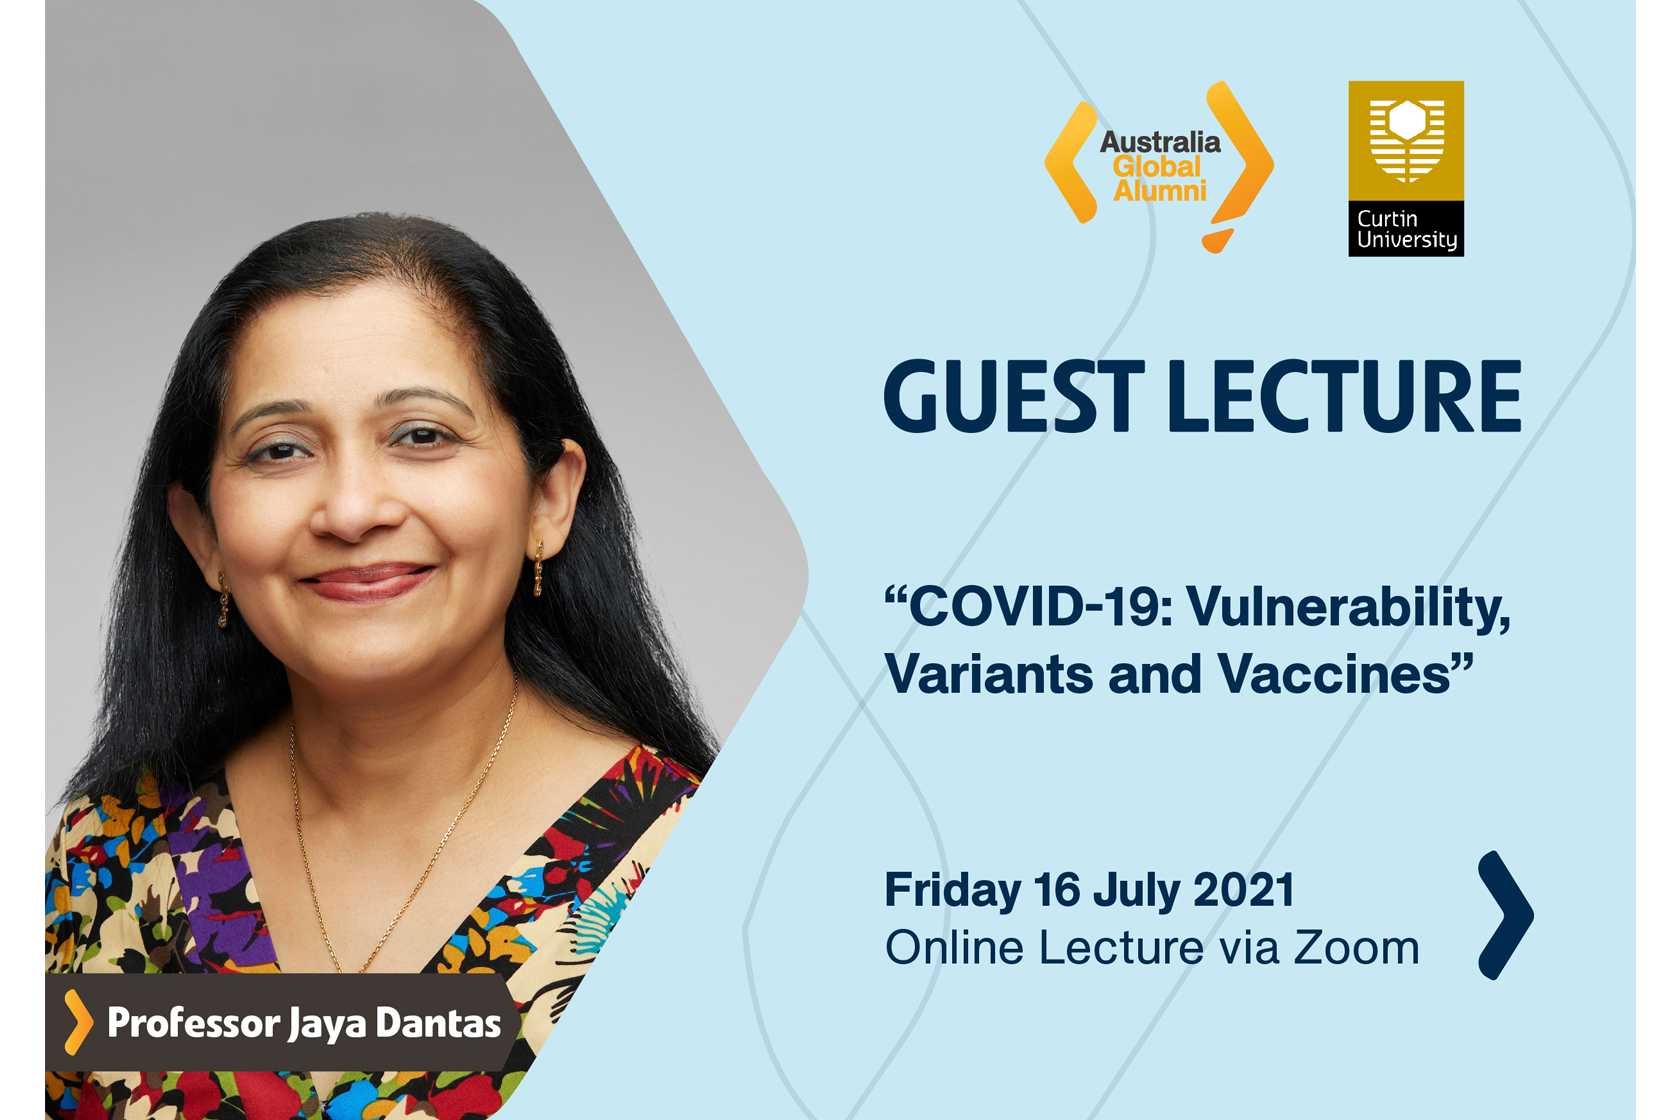 Join us in the Guest Lecture on COVID-19: Vulnerability, Variants and Vaccines